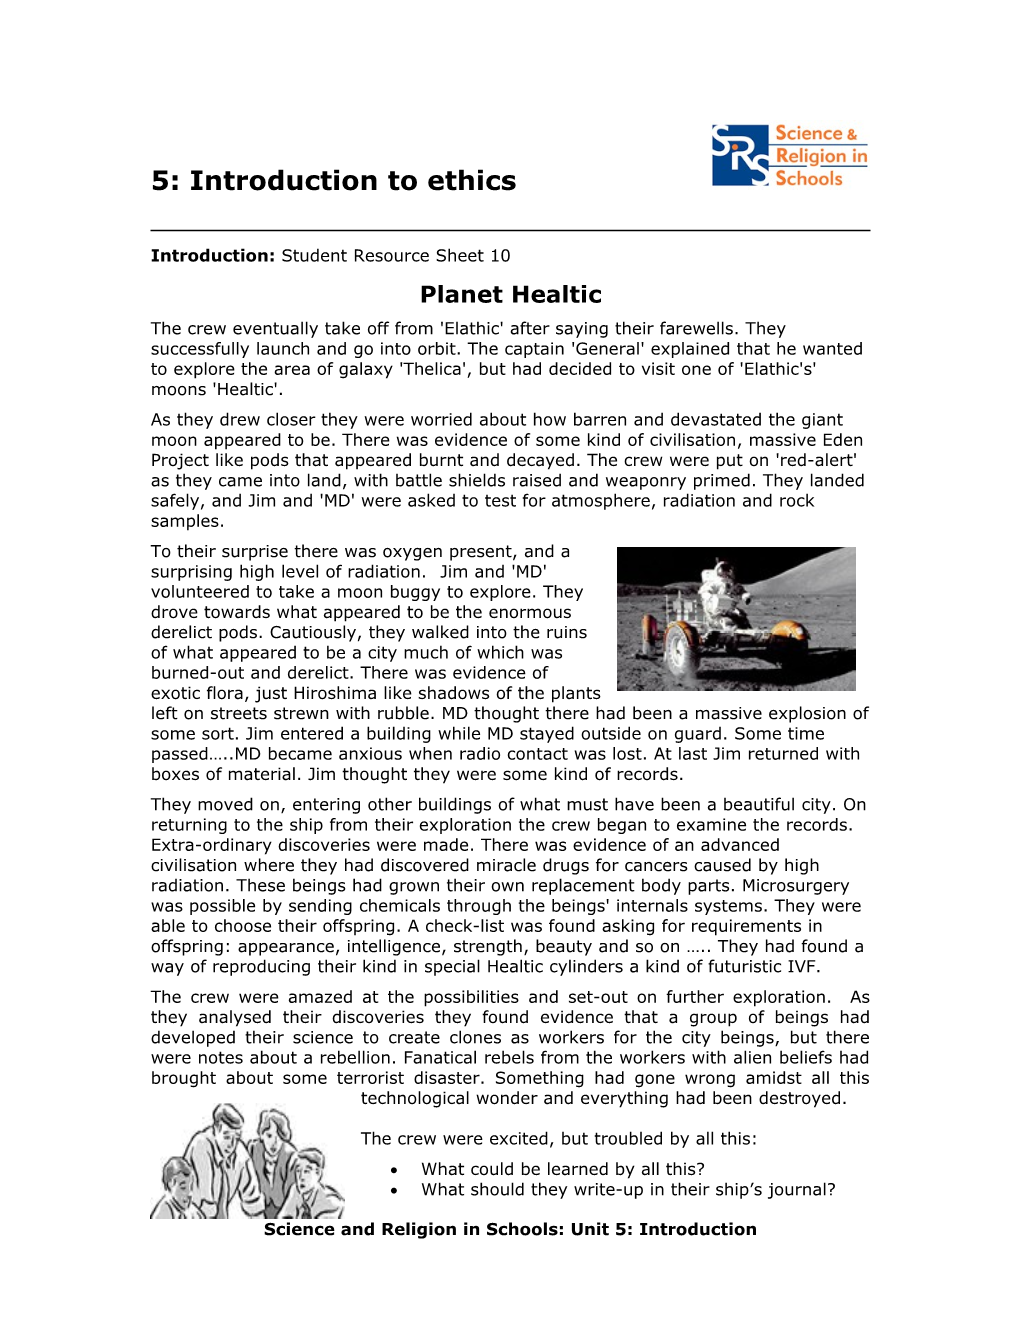 5 Introduction to Ethics